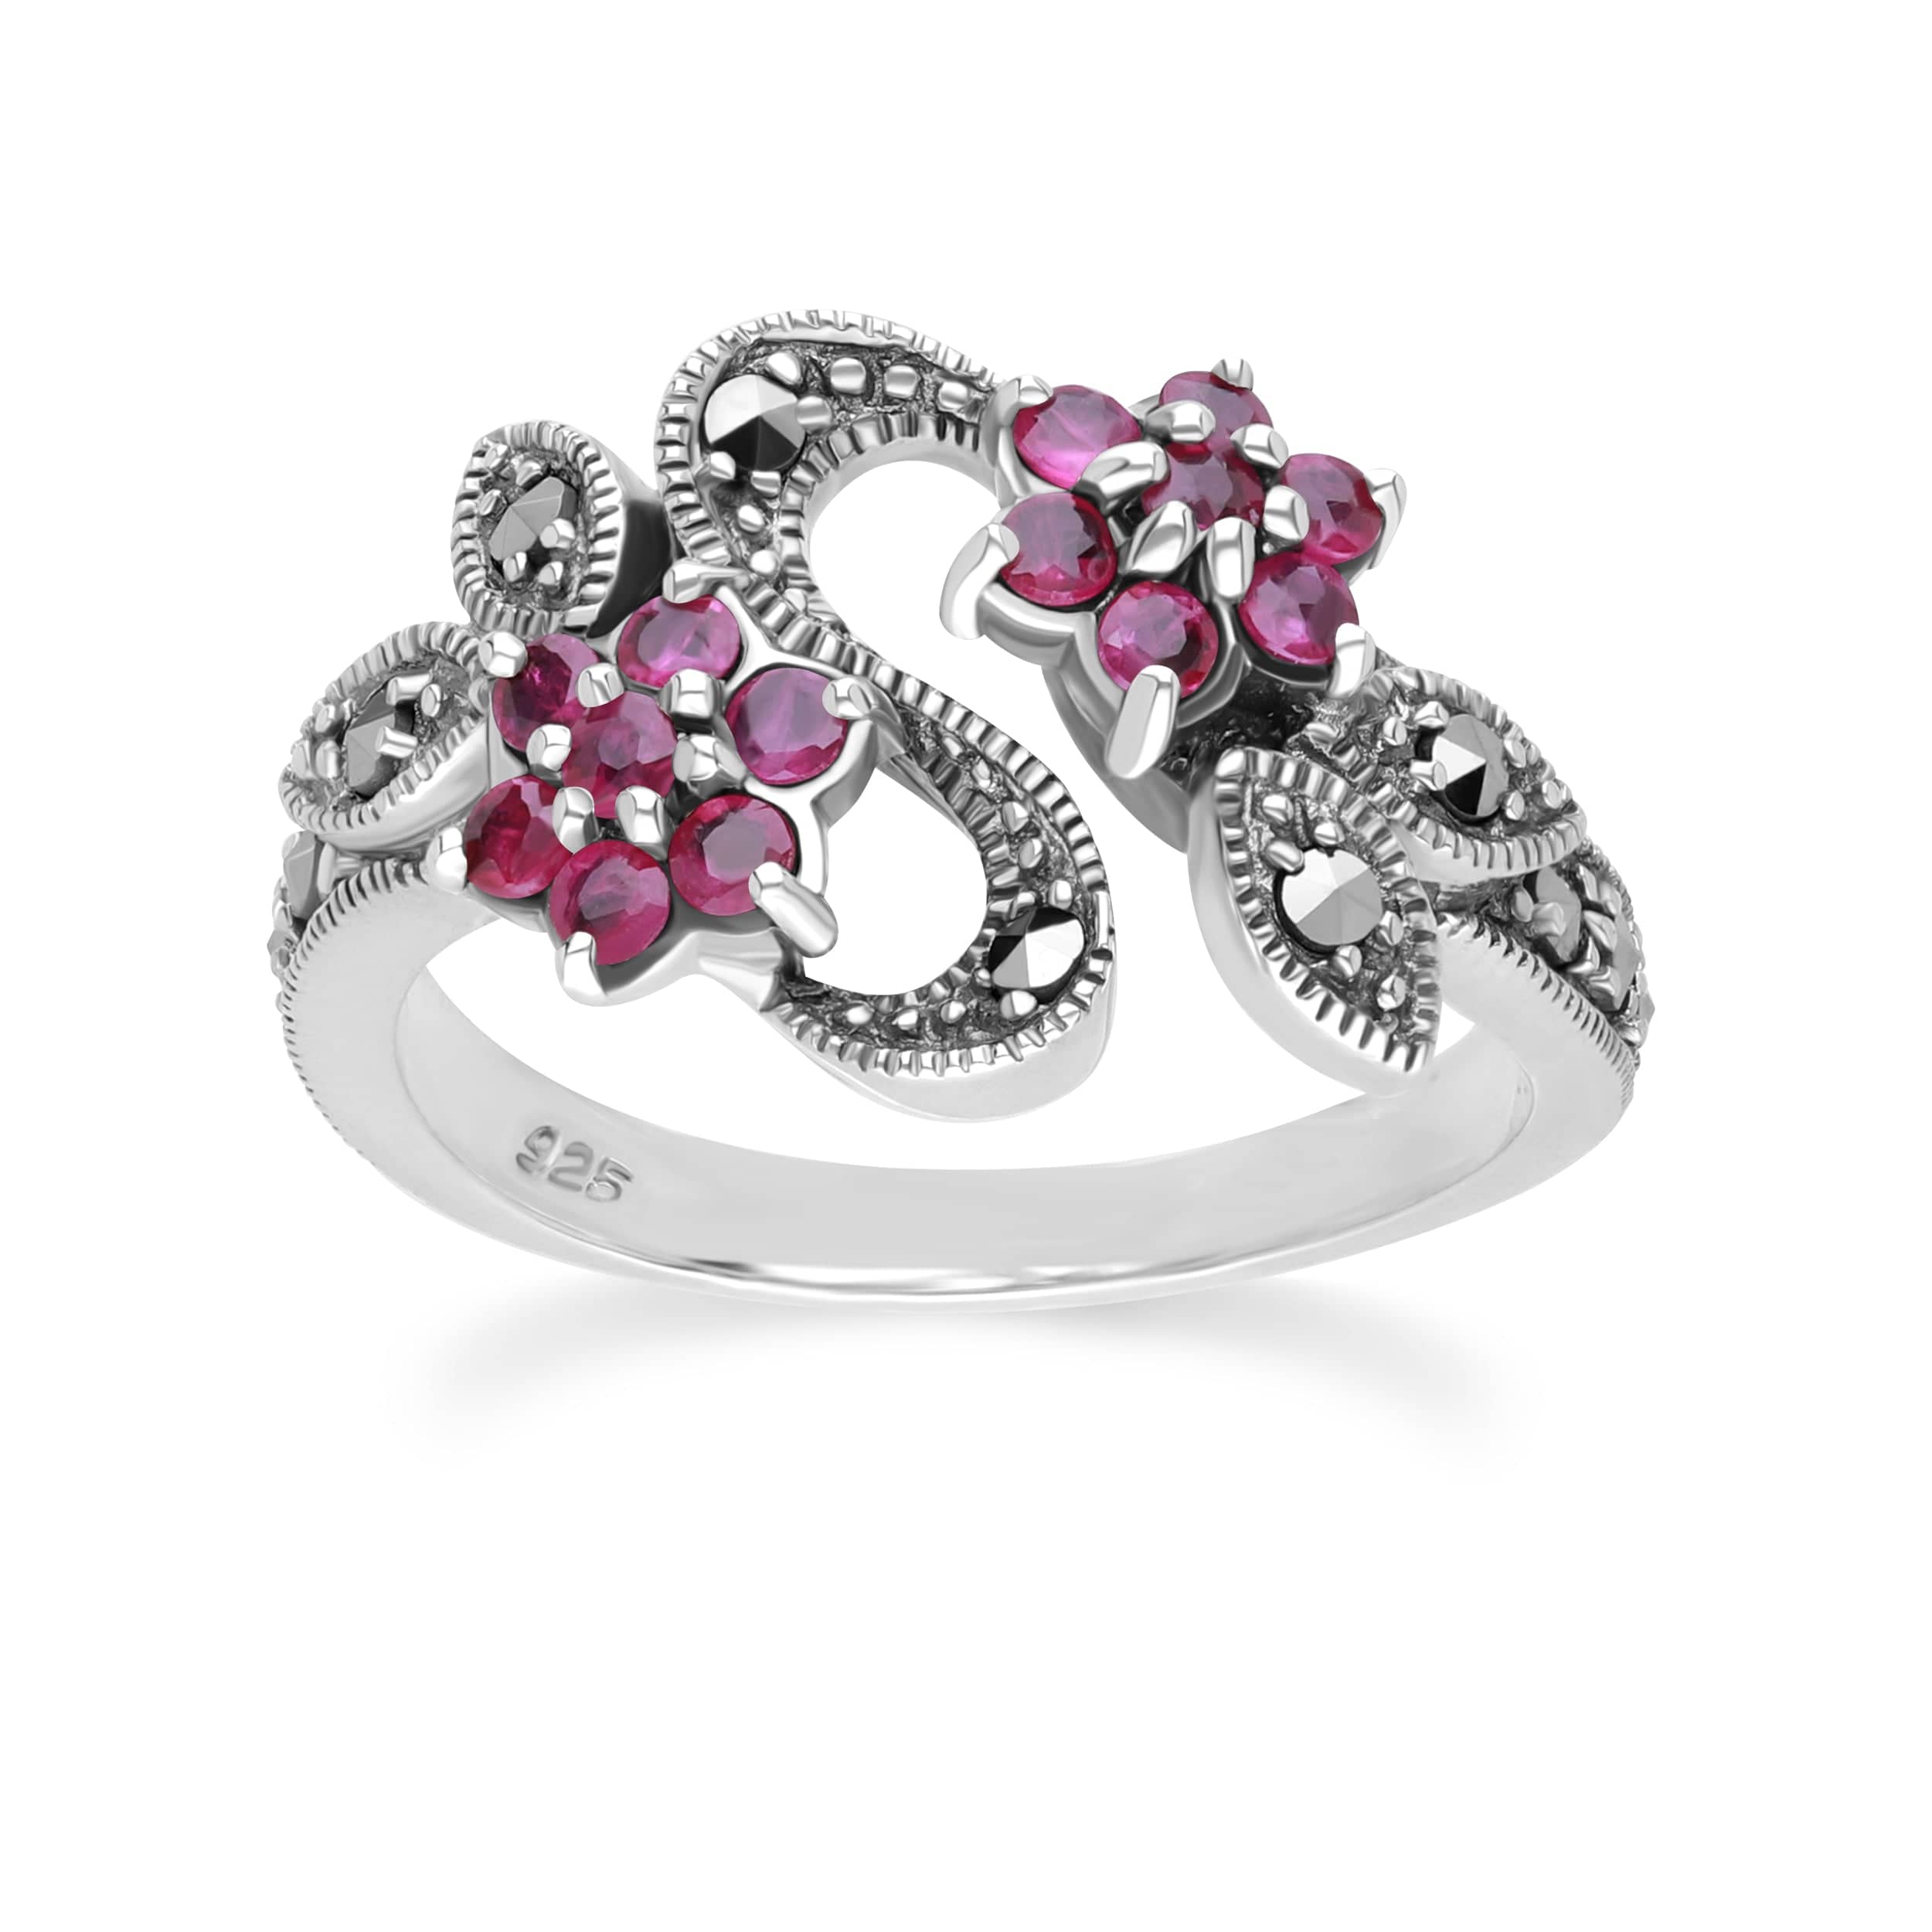 214R247401925 Art Nouveau Style Round Ruby & Marcasite Flower Ring in Sterling Silver 1